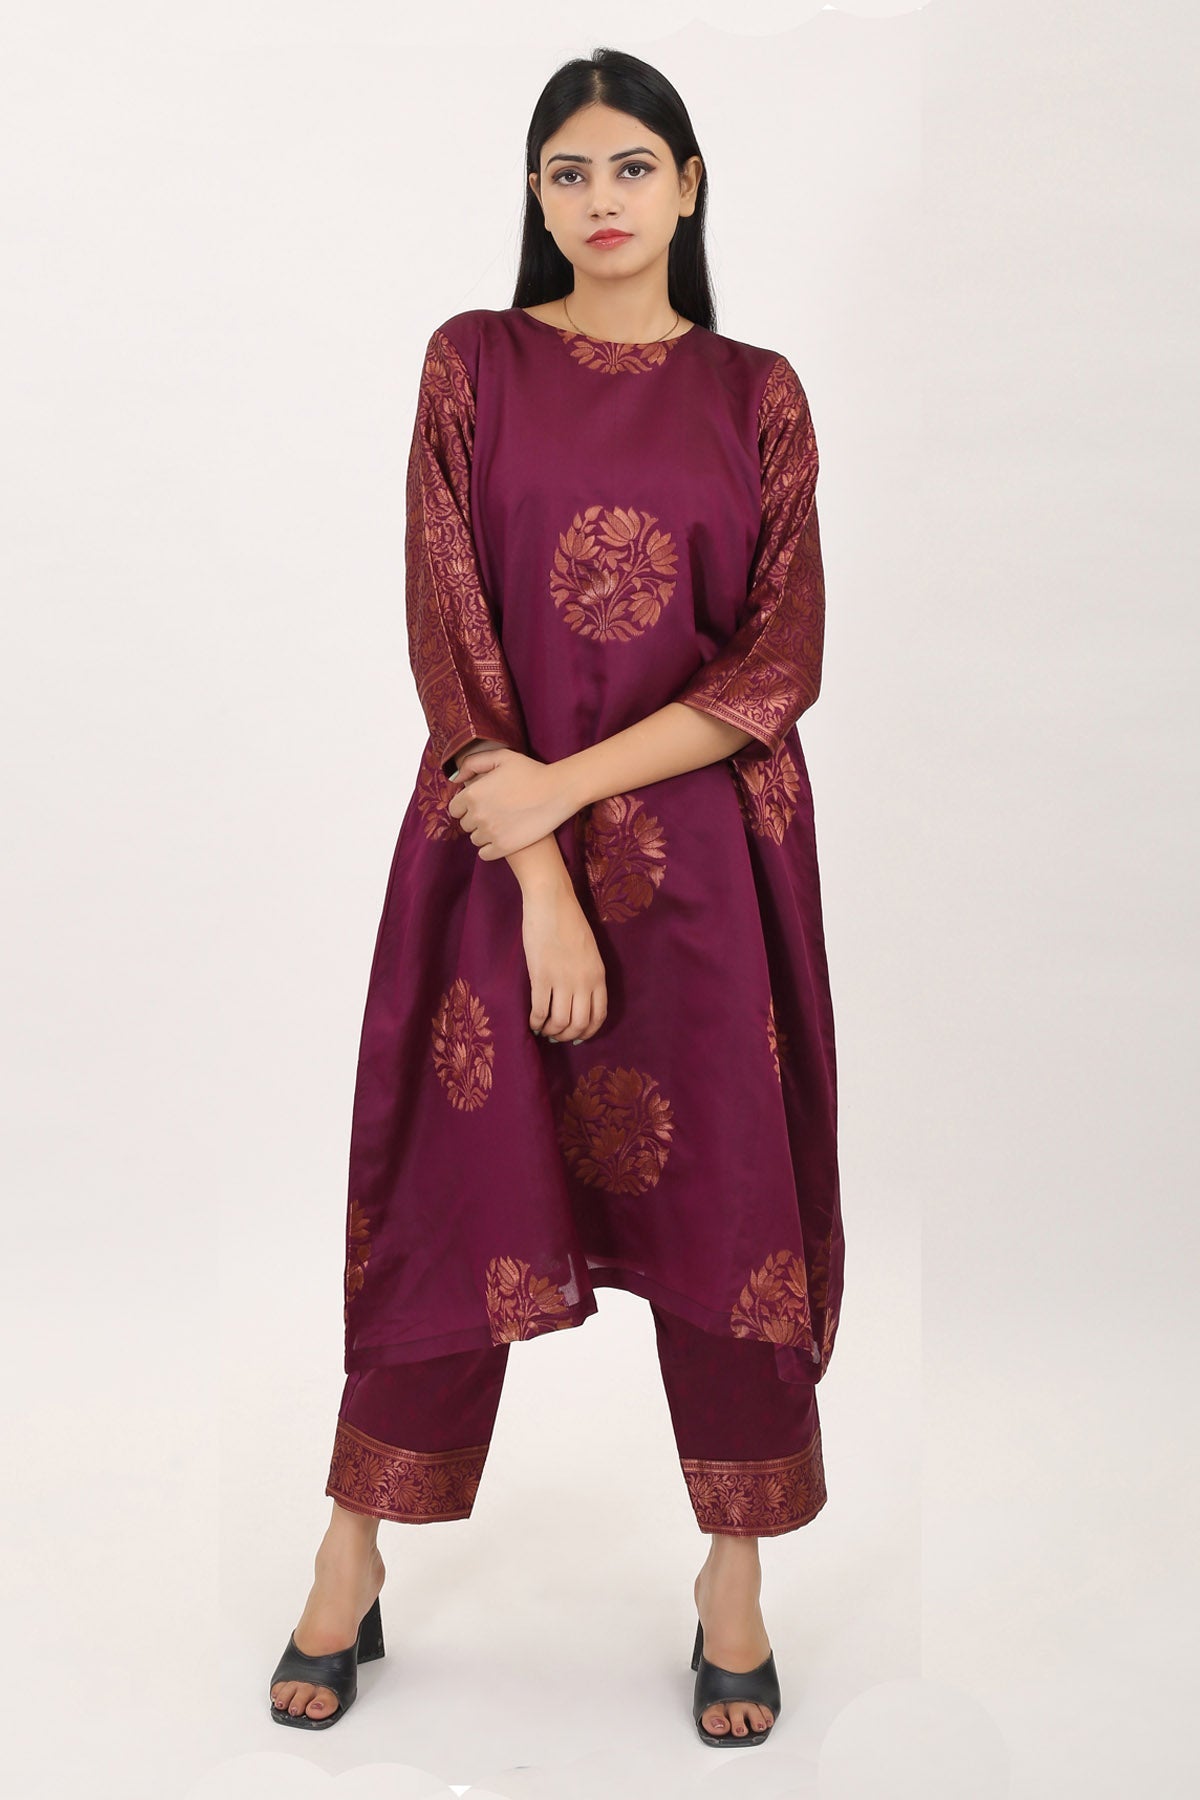 Buy Simply Kitsch Purple Kurta Set for Women online available at ScrollnShops